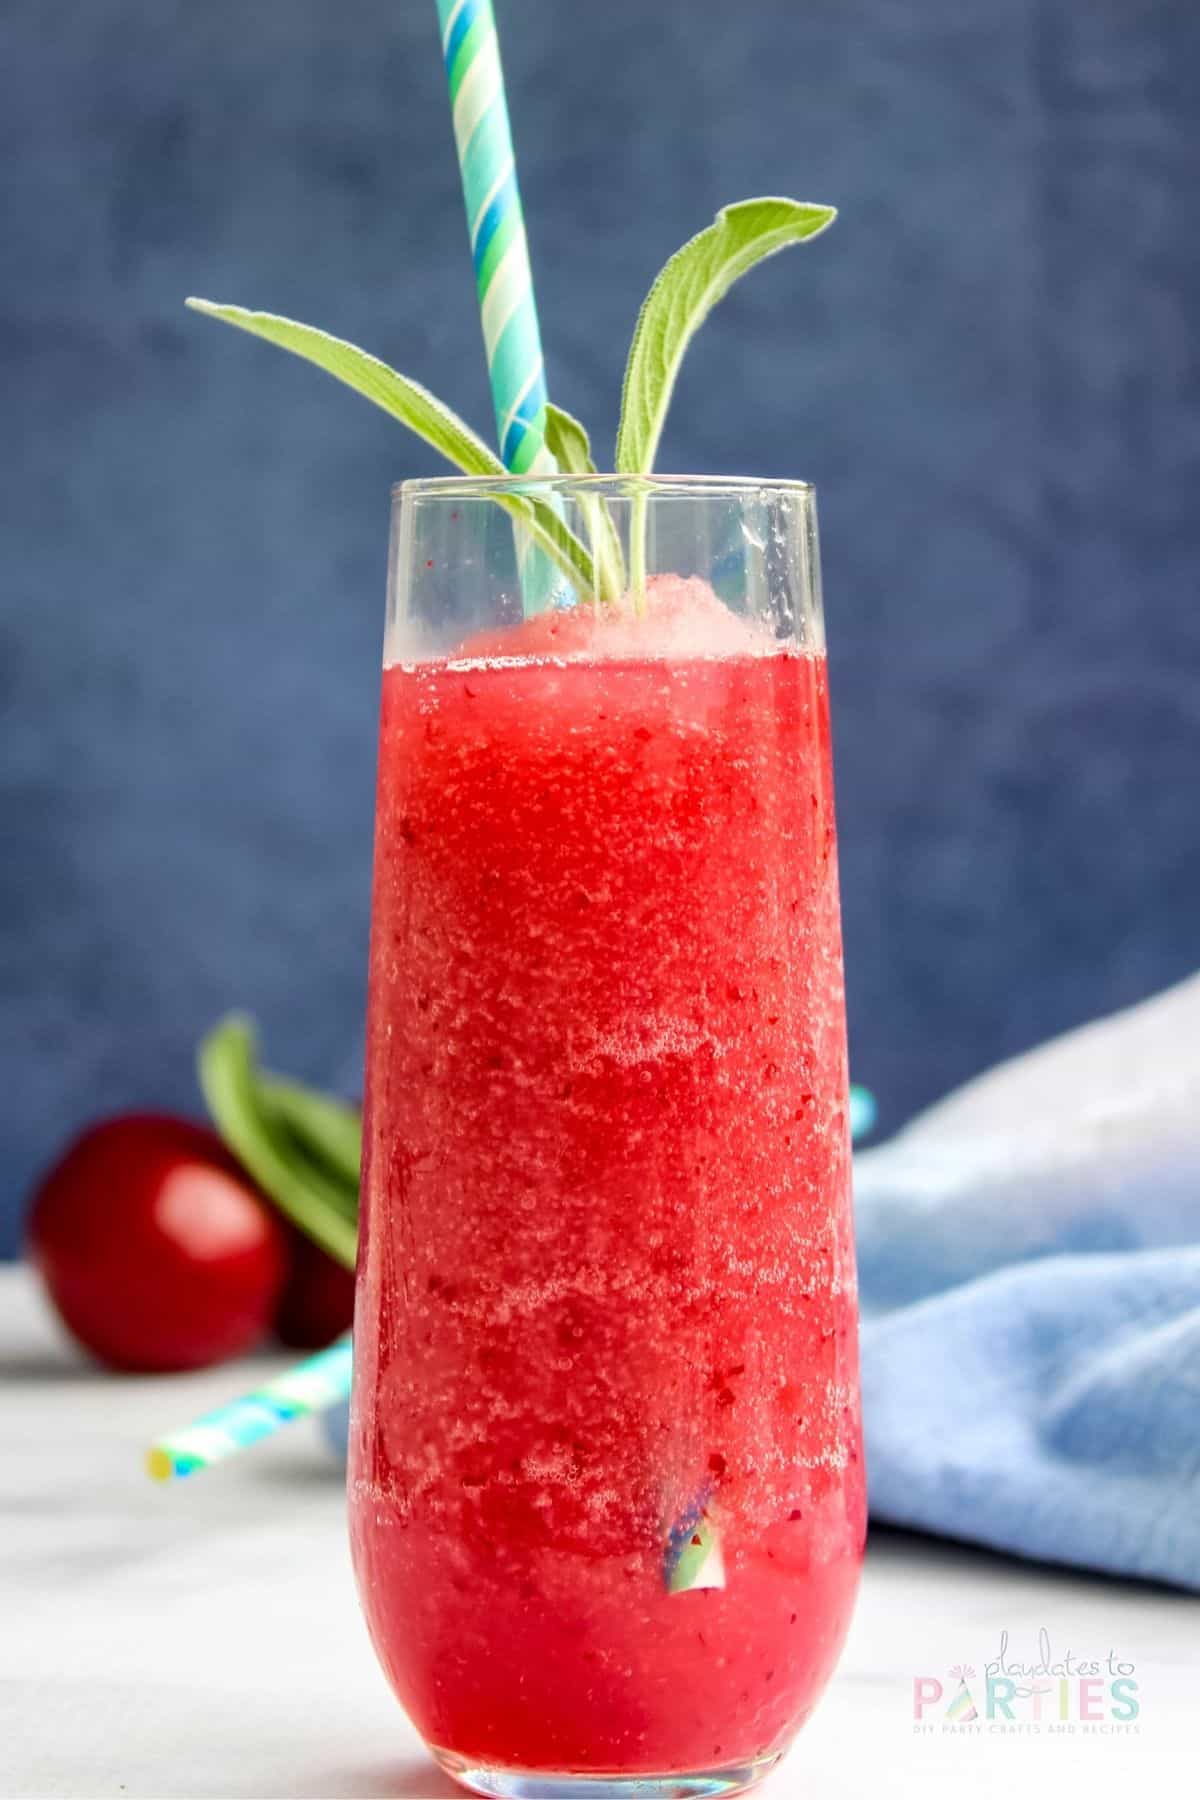 Close up view of a finished blueberry wine slushie with plums garnished with basil and a paper straw